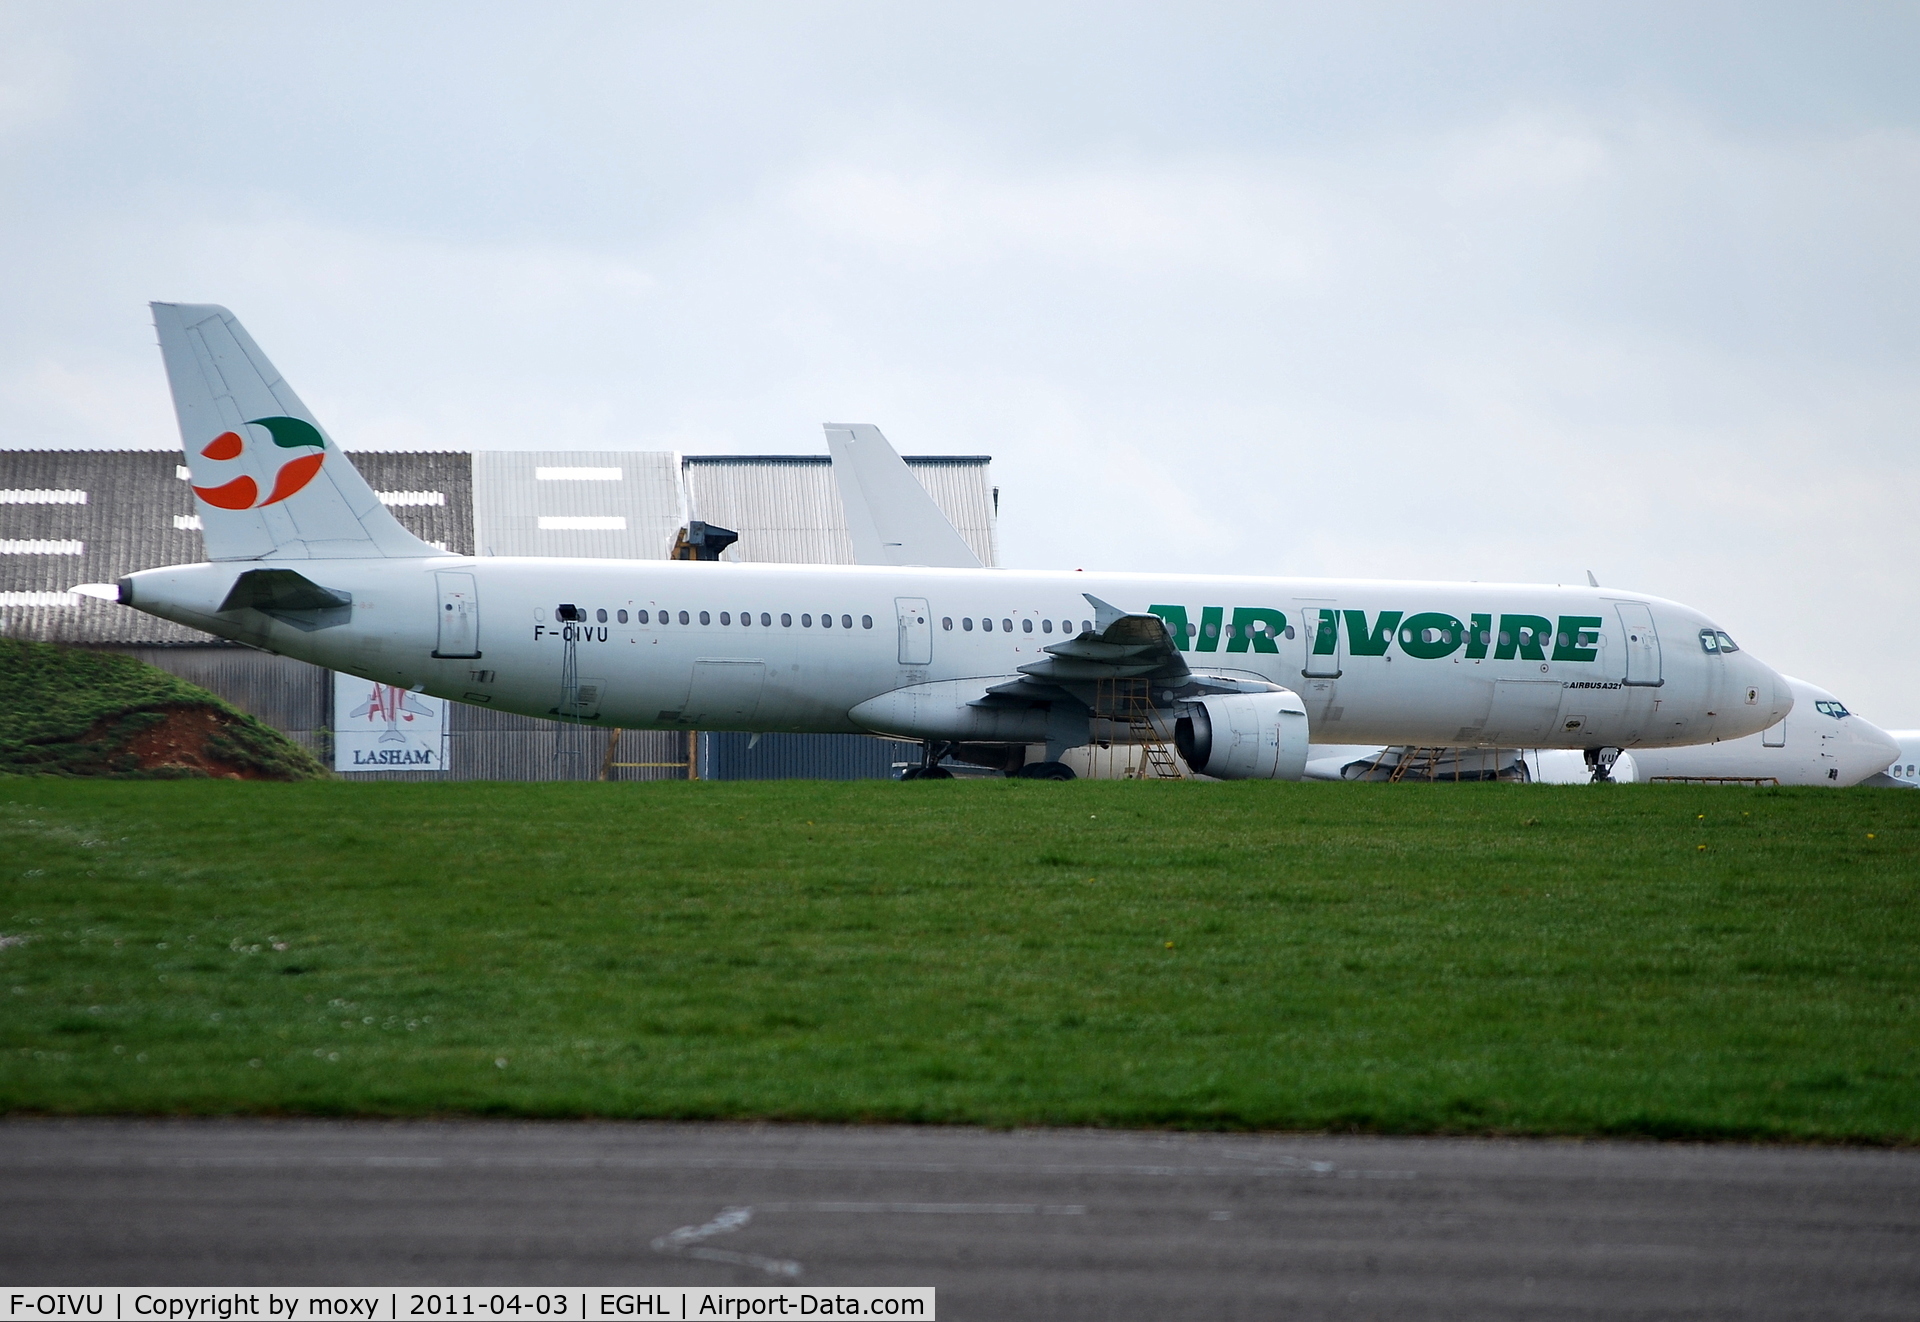 F-OIVU, 1999 Airbus A321-211 C/N 1017, Airbus A321-211 stored at Lasham for GECAS after
lease ended.